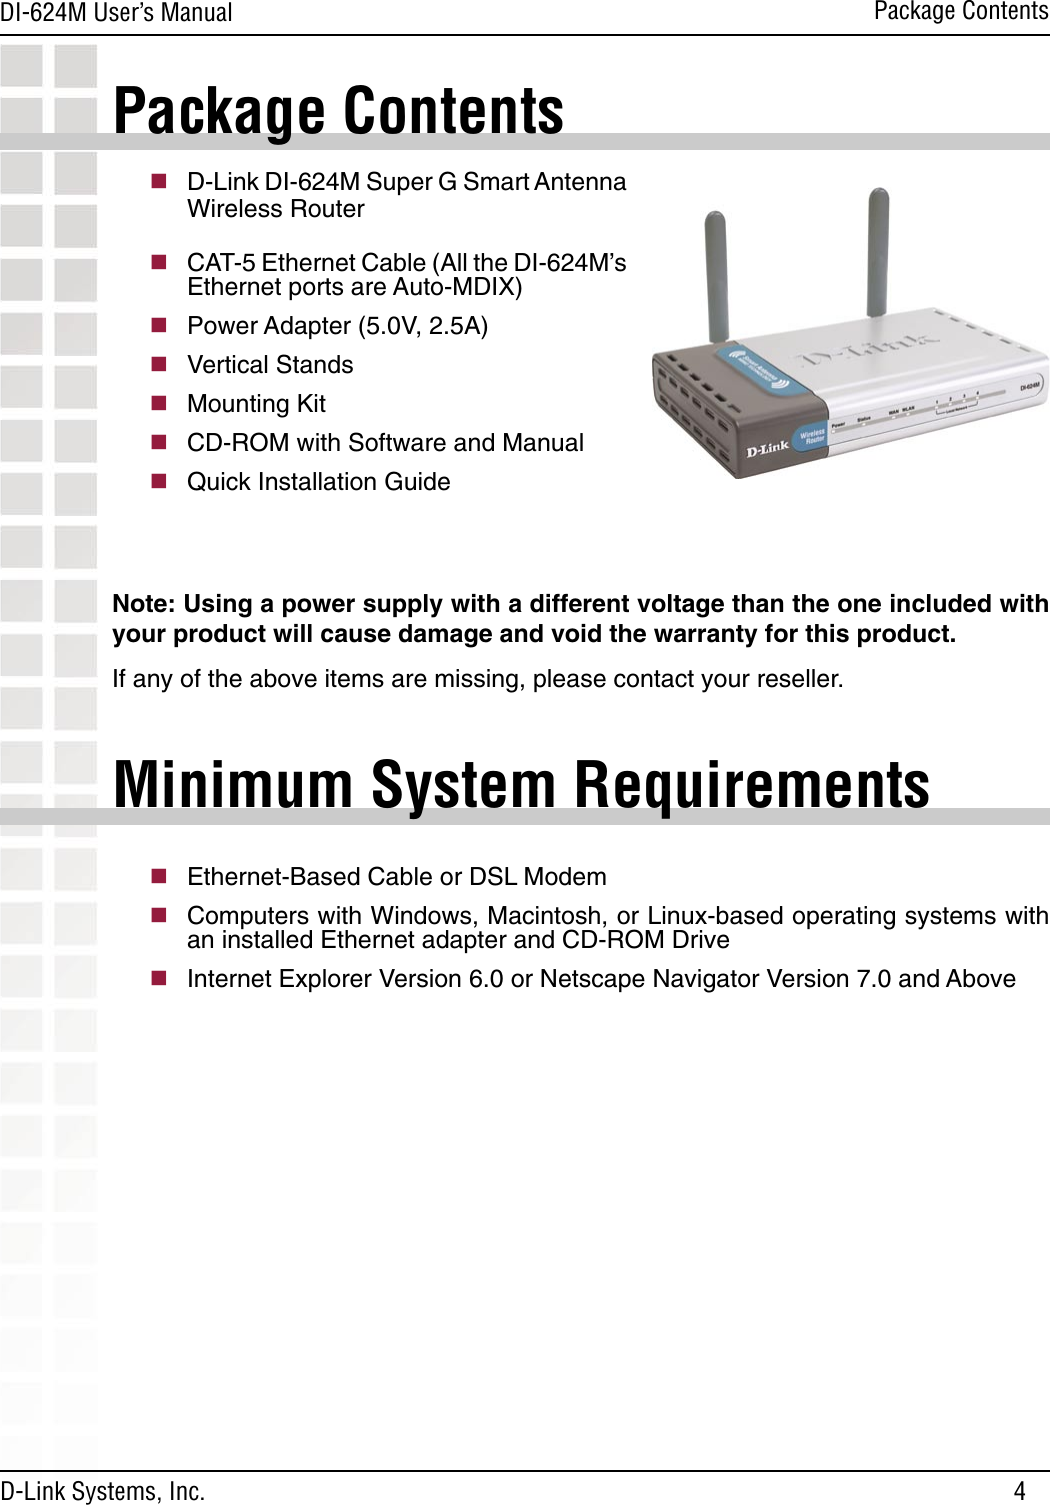 4DI-624M User’s Manual D-Link Systems, Inc.Package ContentsPackage Contentsn D-Link DI-624M Super G Smart Antenna Wireless Routern CAT-5 Ethernet Cable (All the DI-624M’s Ethernet ports are Auto-MDIX) n Power Adapter (5.0V, 2.5A)n Vertical Standsn Mounting Kitn CD-ROM with Software and Manualn Quick Installation GuideNote: Using a power supply with a different voltage than the one included with your product will cause damage and void the warranty for this product.If any of the above items are missing, please contact your reseller.Minimum System Requirementsn Ethernet-Based Cable or DSL Modemn Computers with Windows, Macintosh, or Linux-based operating systems with an installed Ethernet adapter and CD-ROM Driven Internet Explorer Version 6.0 or Netscape Navigator Version 7.0 and Above  